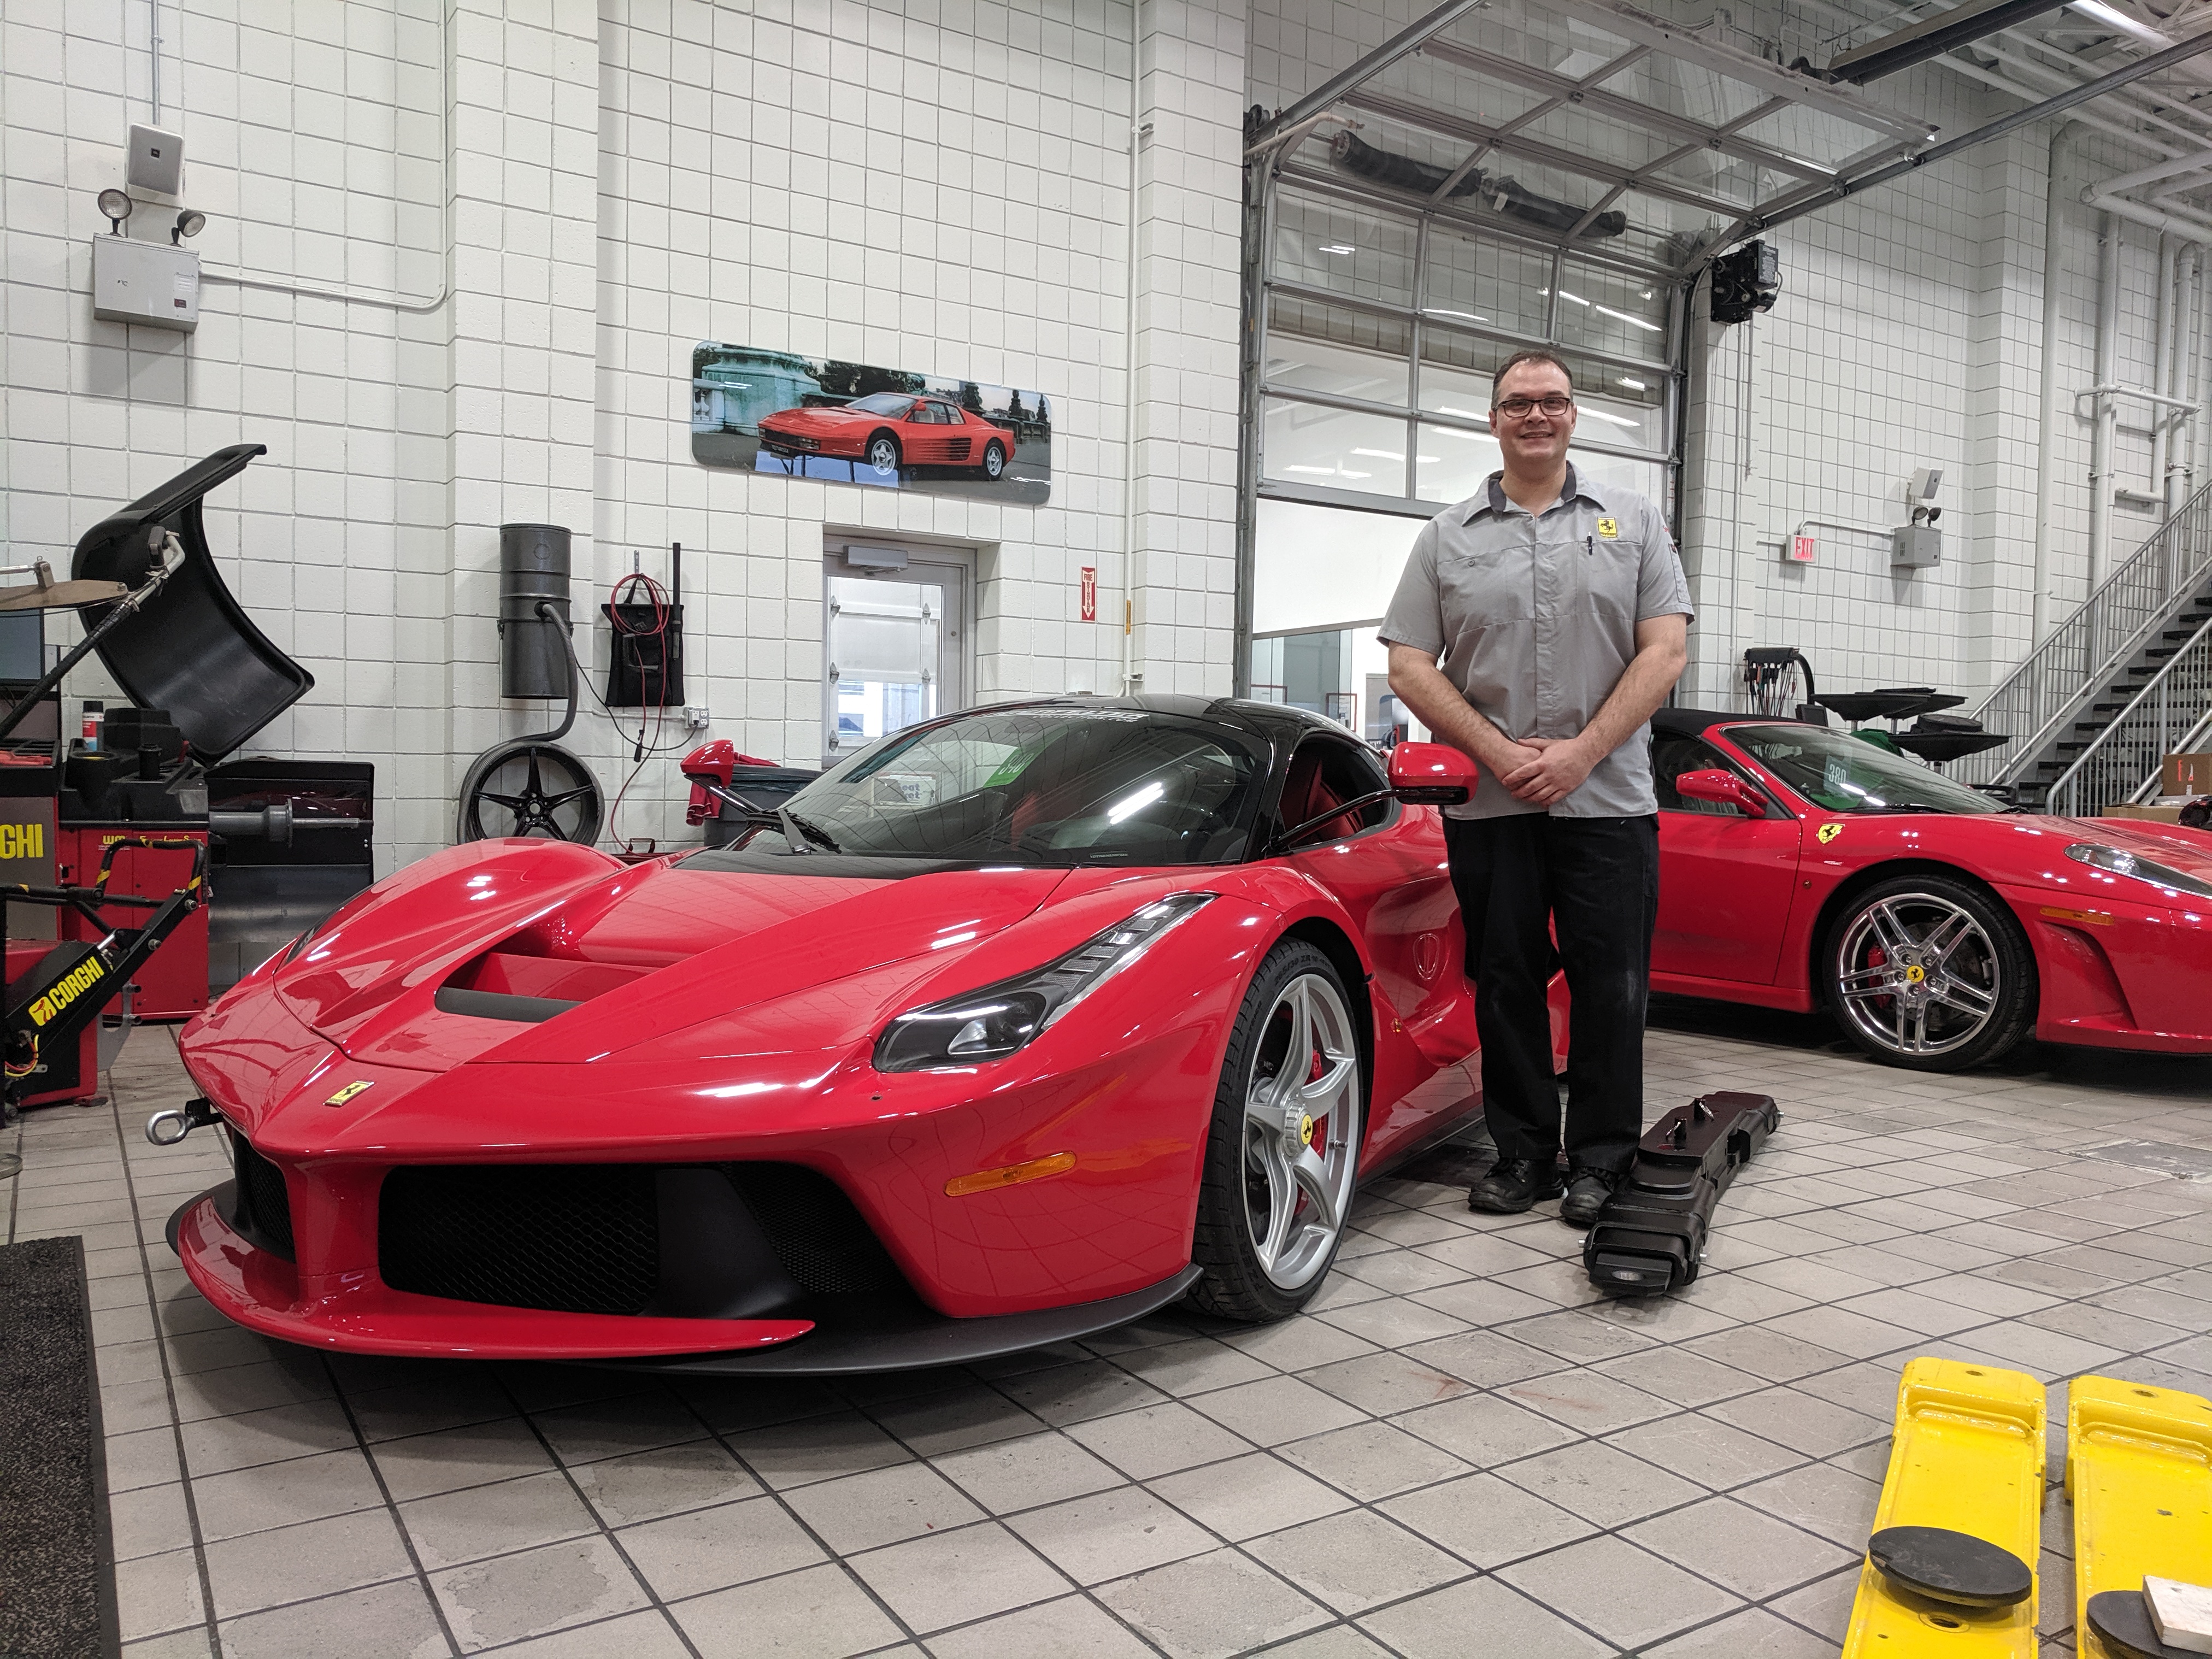 Salter prepares to work on a 2015 Ferrari LaFerrari hybrid—part of the Lingenfelter Collection and one of just 300 sold in the U.S.